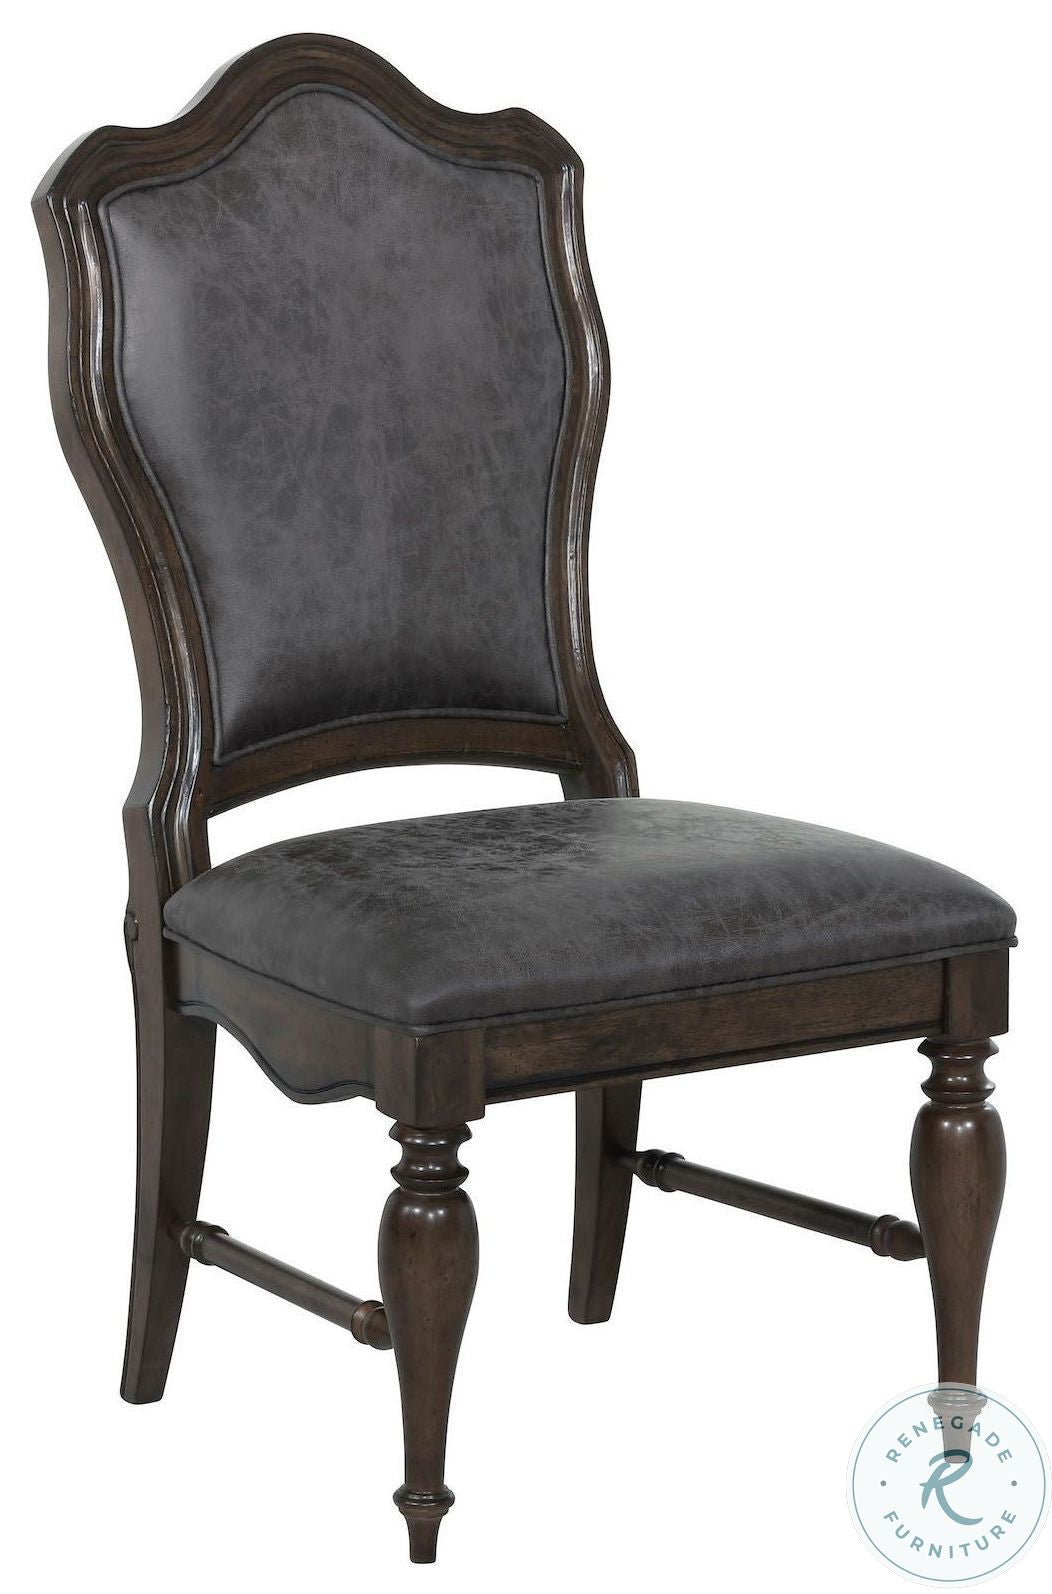 Rich Brown Acacia Set of 2 Upholstered Side Chairs By: Alabama Beds